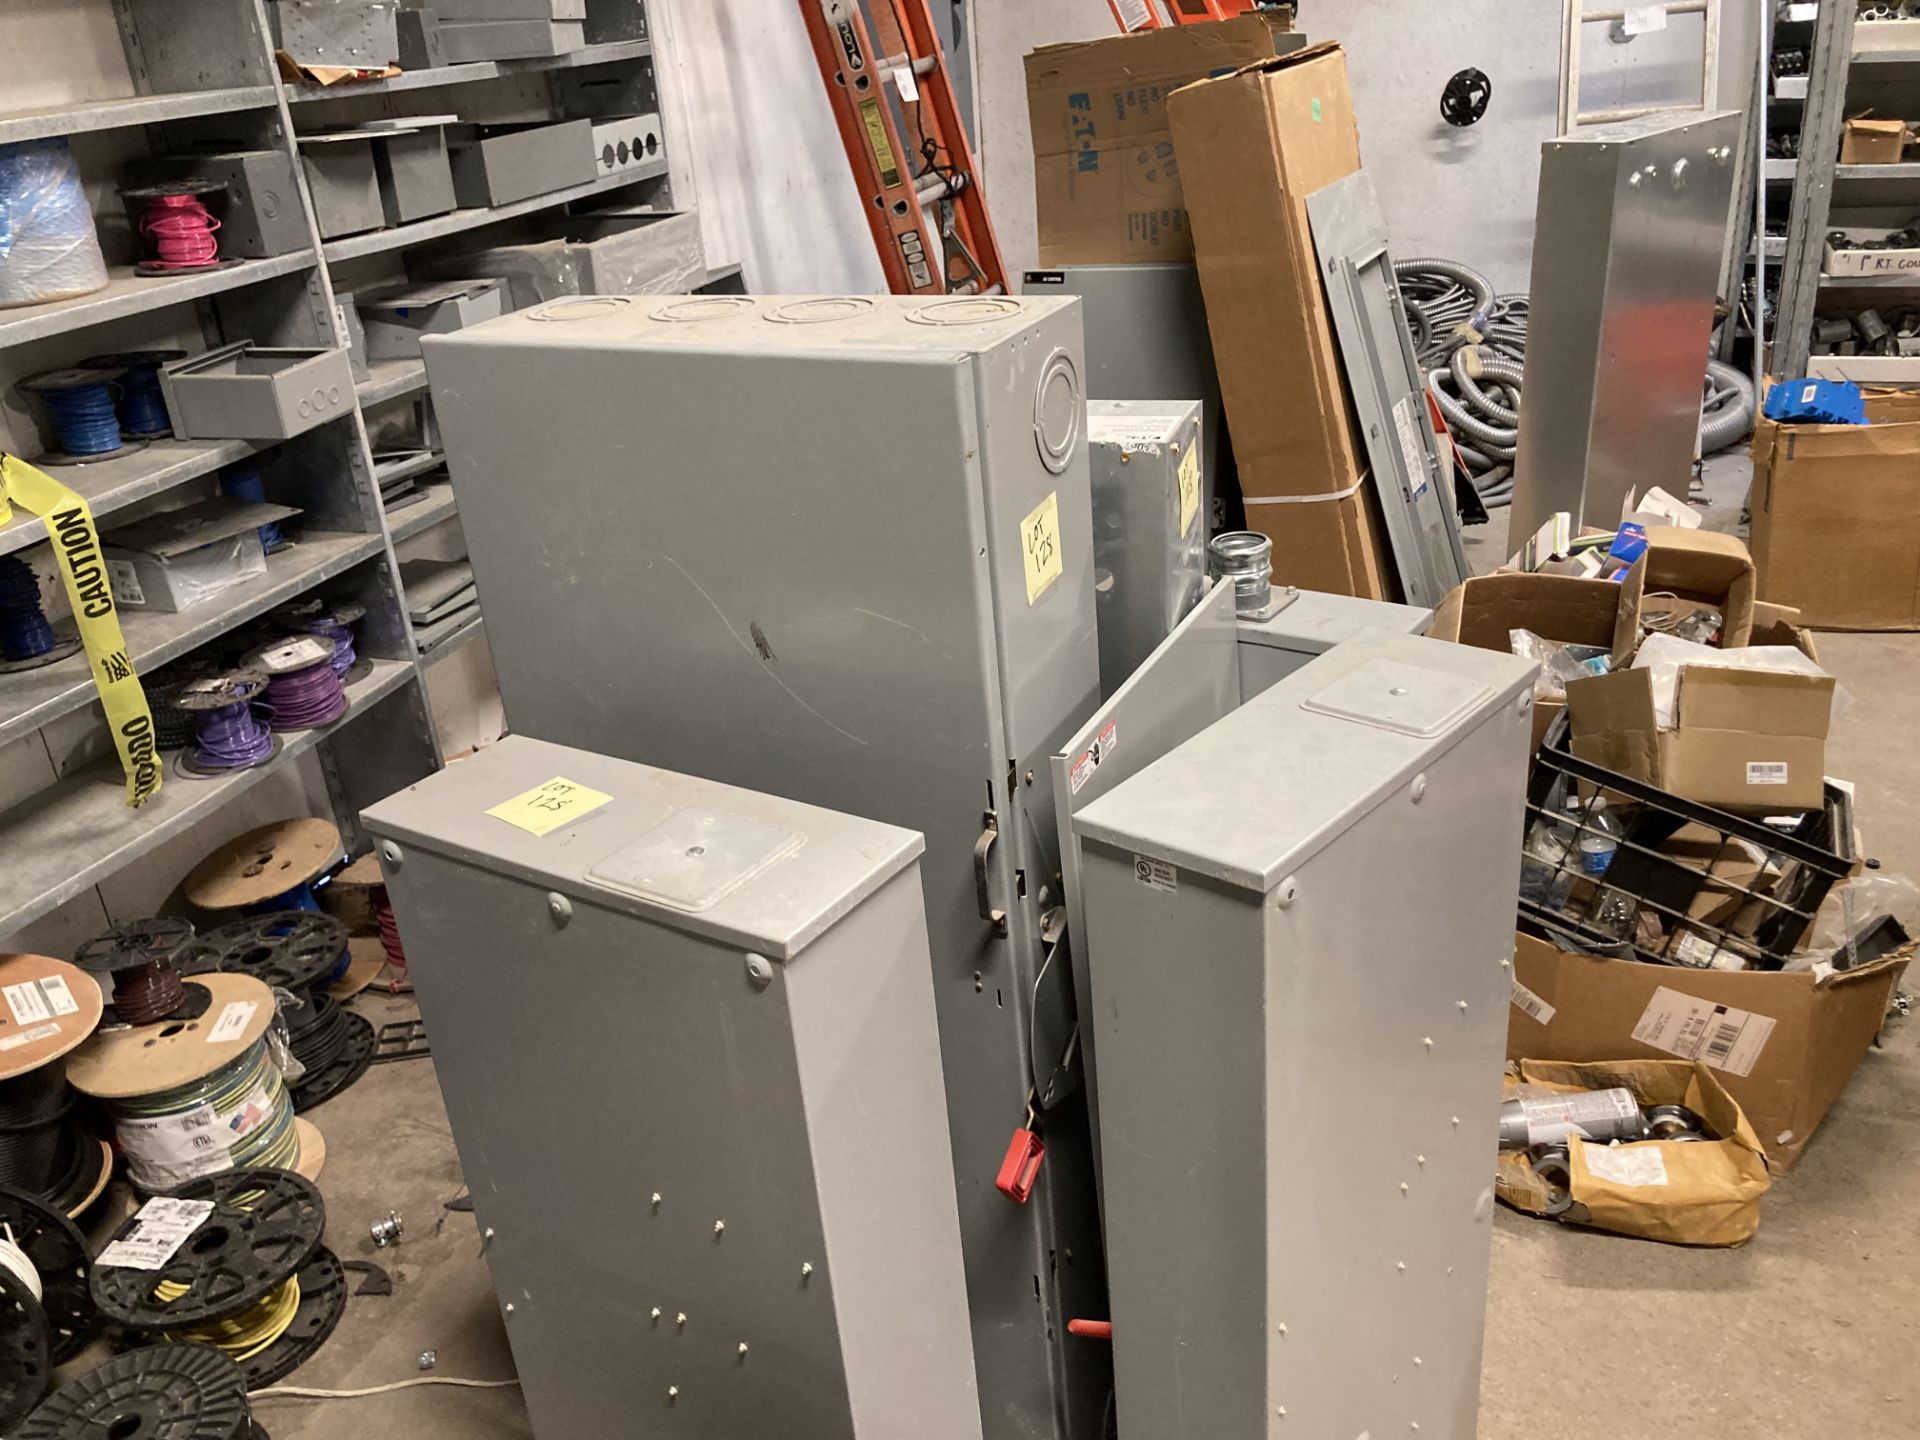 LOT OF: (8) electrical power boxes, large. Approximately 4 foot high 2 foot wide 6 inches deep